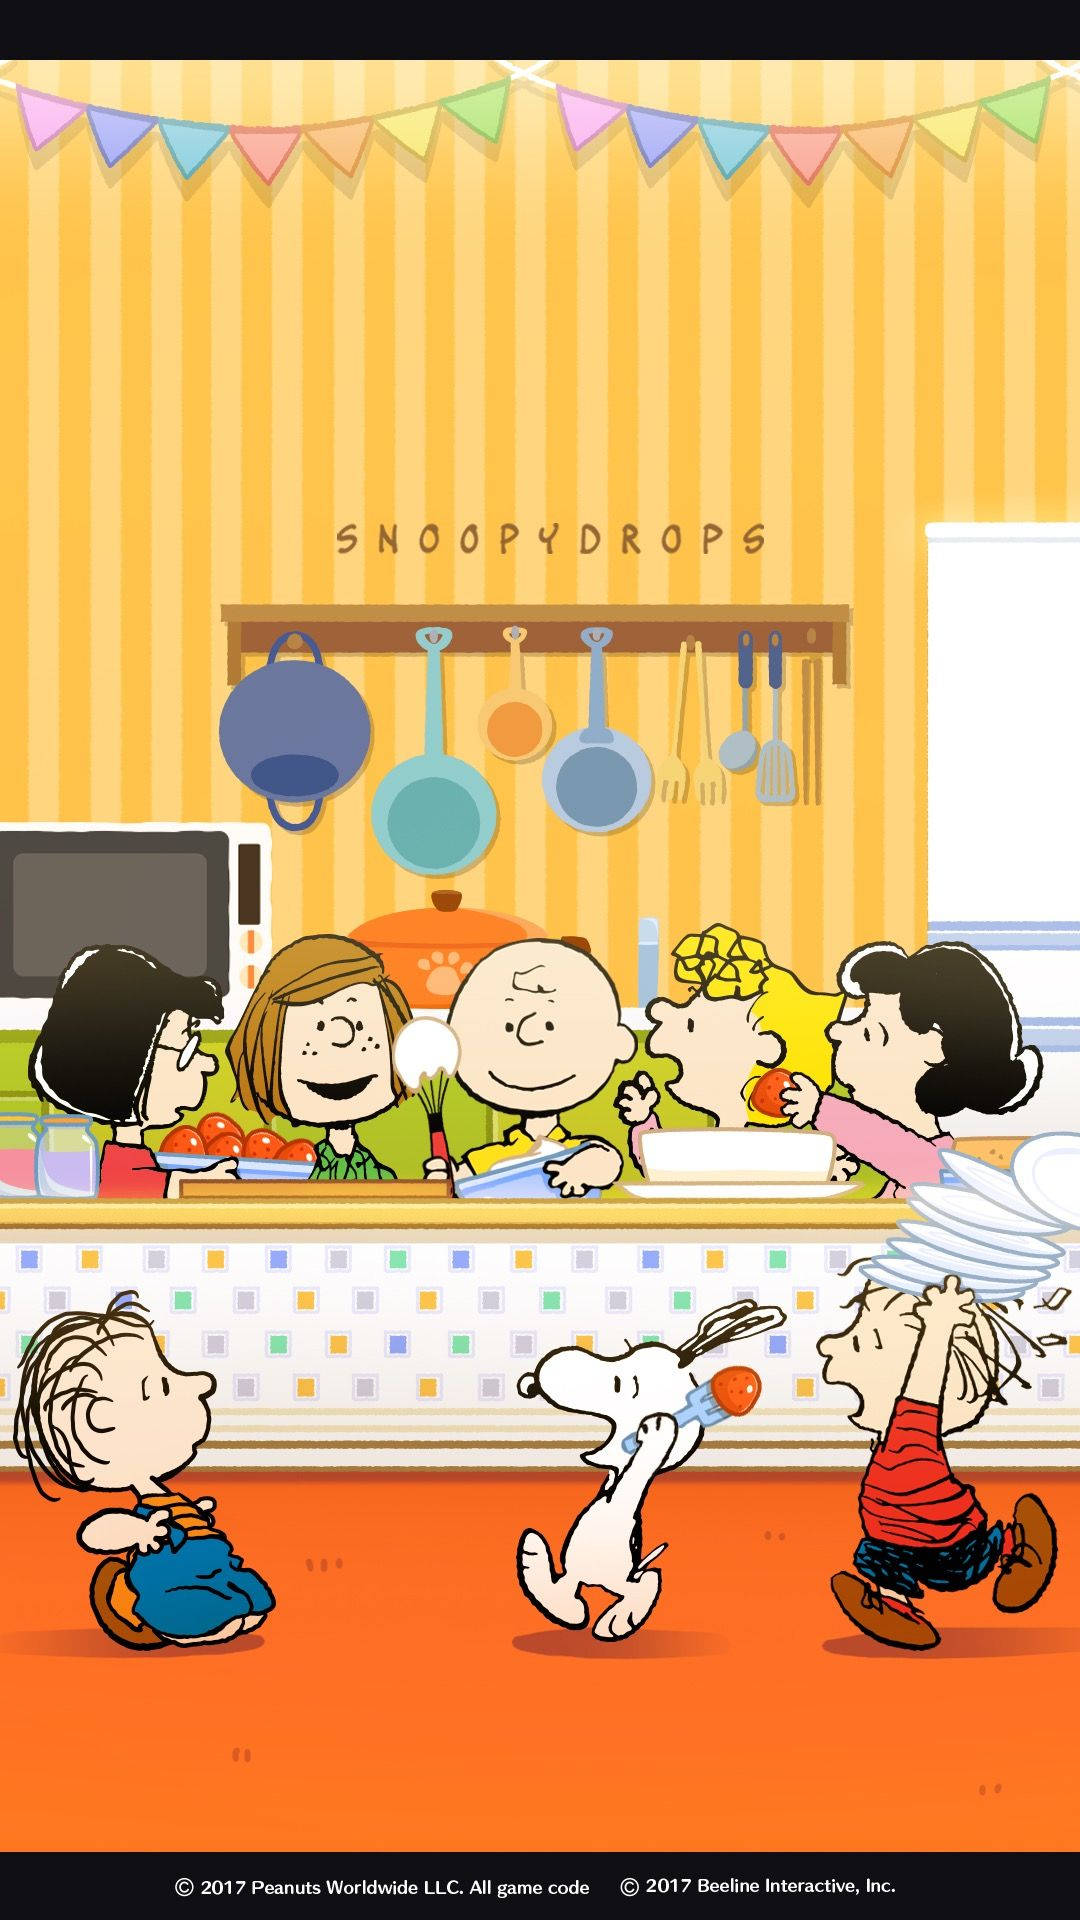 Free Snoopy Wallpaper Downloads, [200+] Snoopy Wallpapers for FREE |  